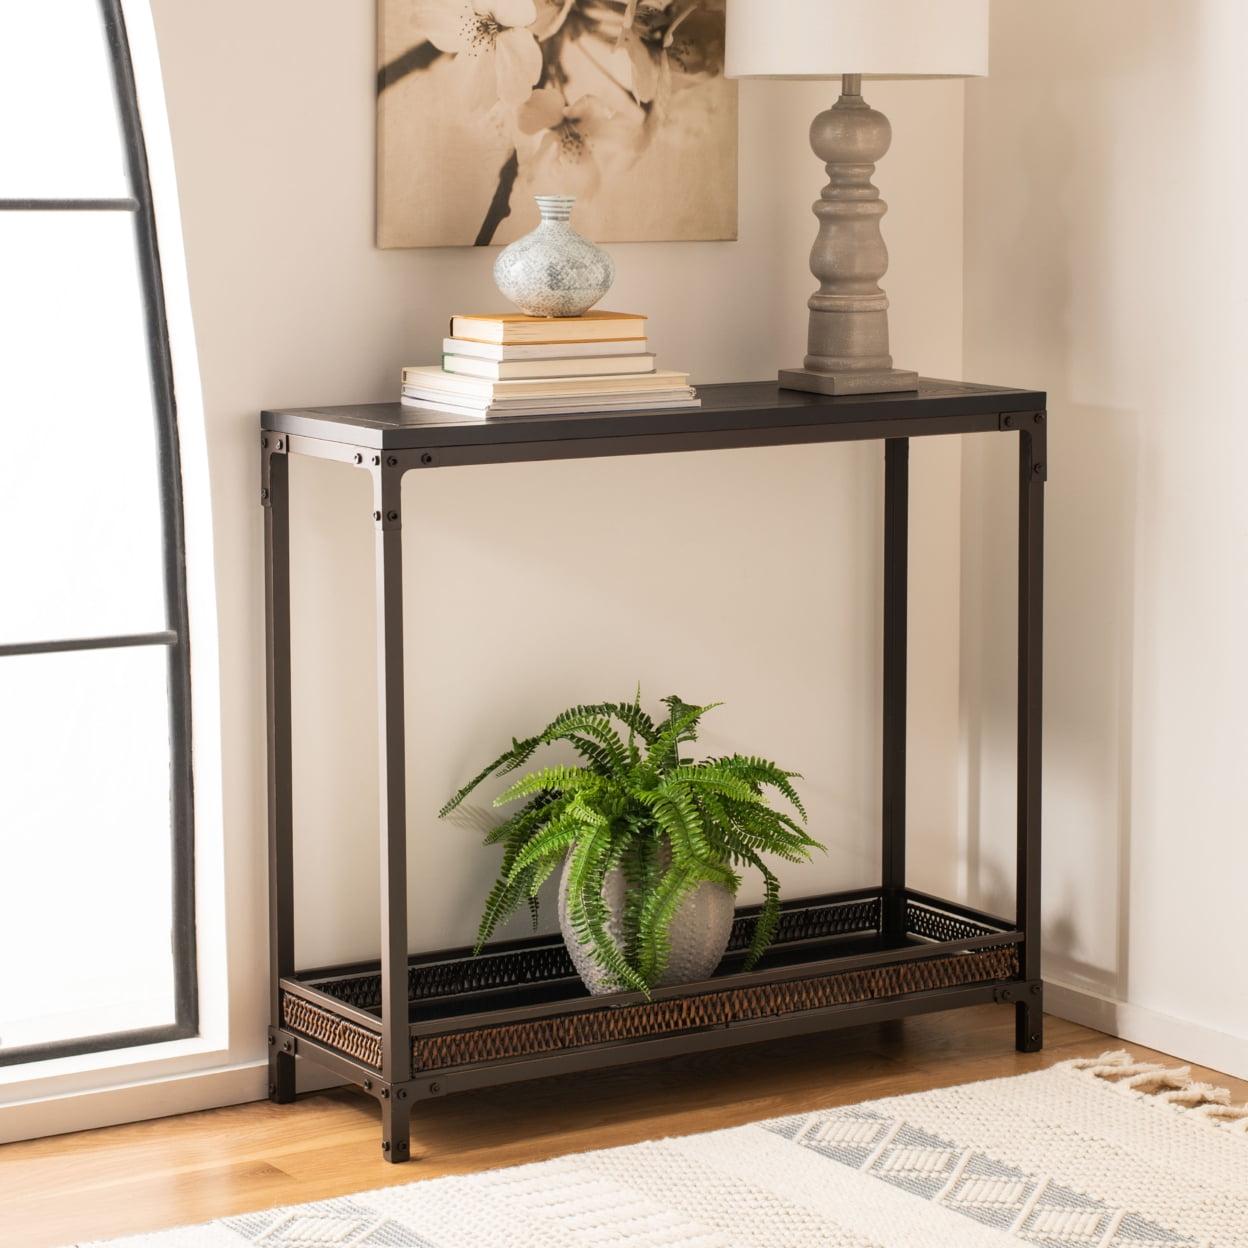 Transitional Black and Dark Walnut Console Table with Storage Shelf